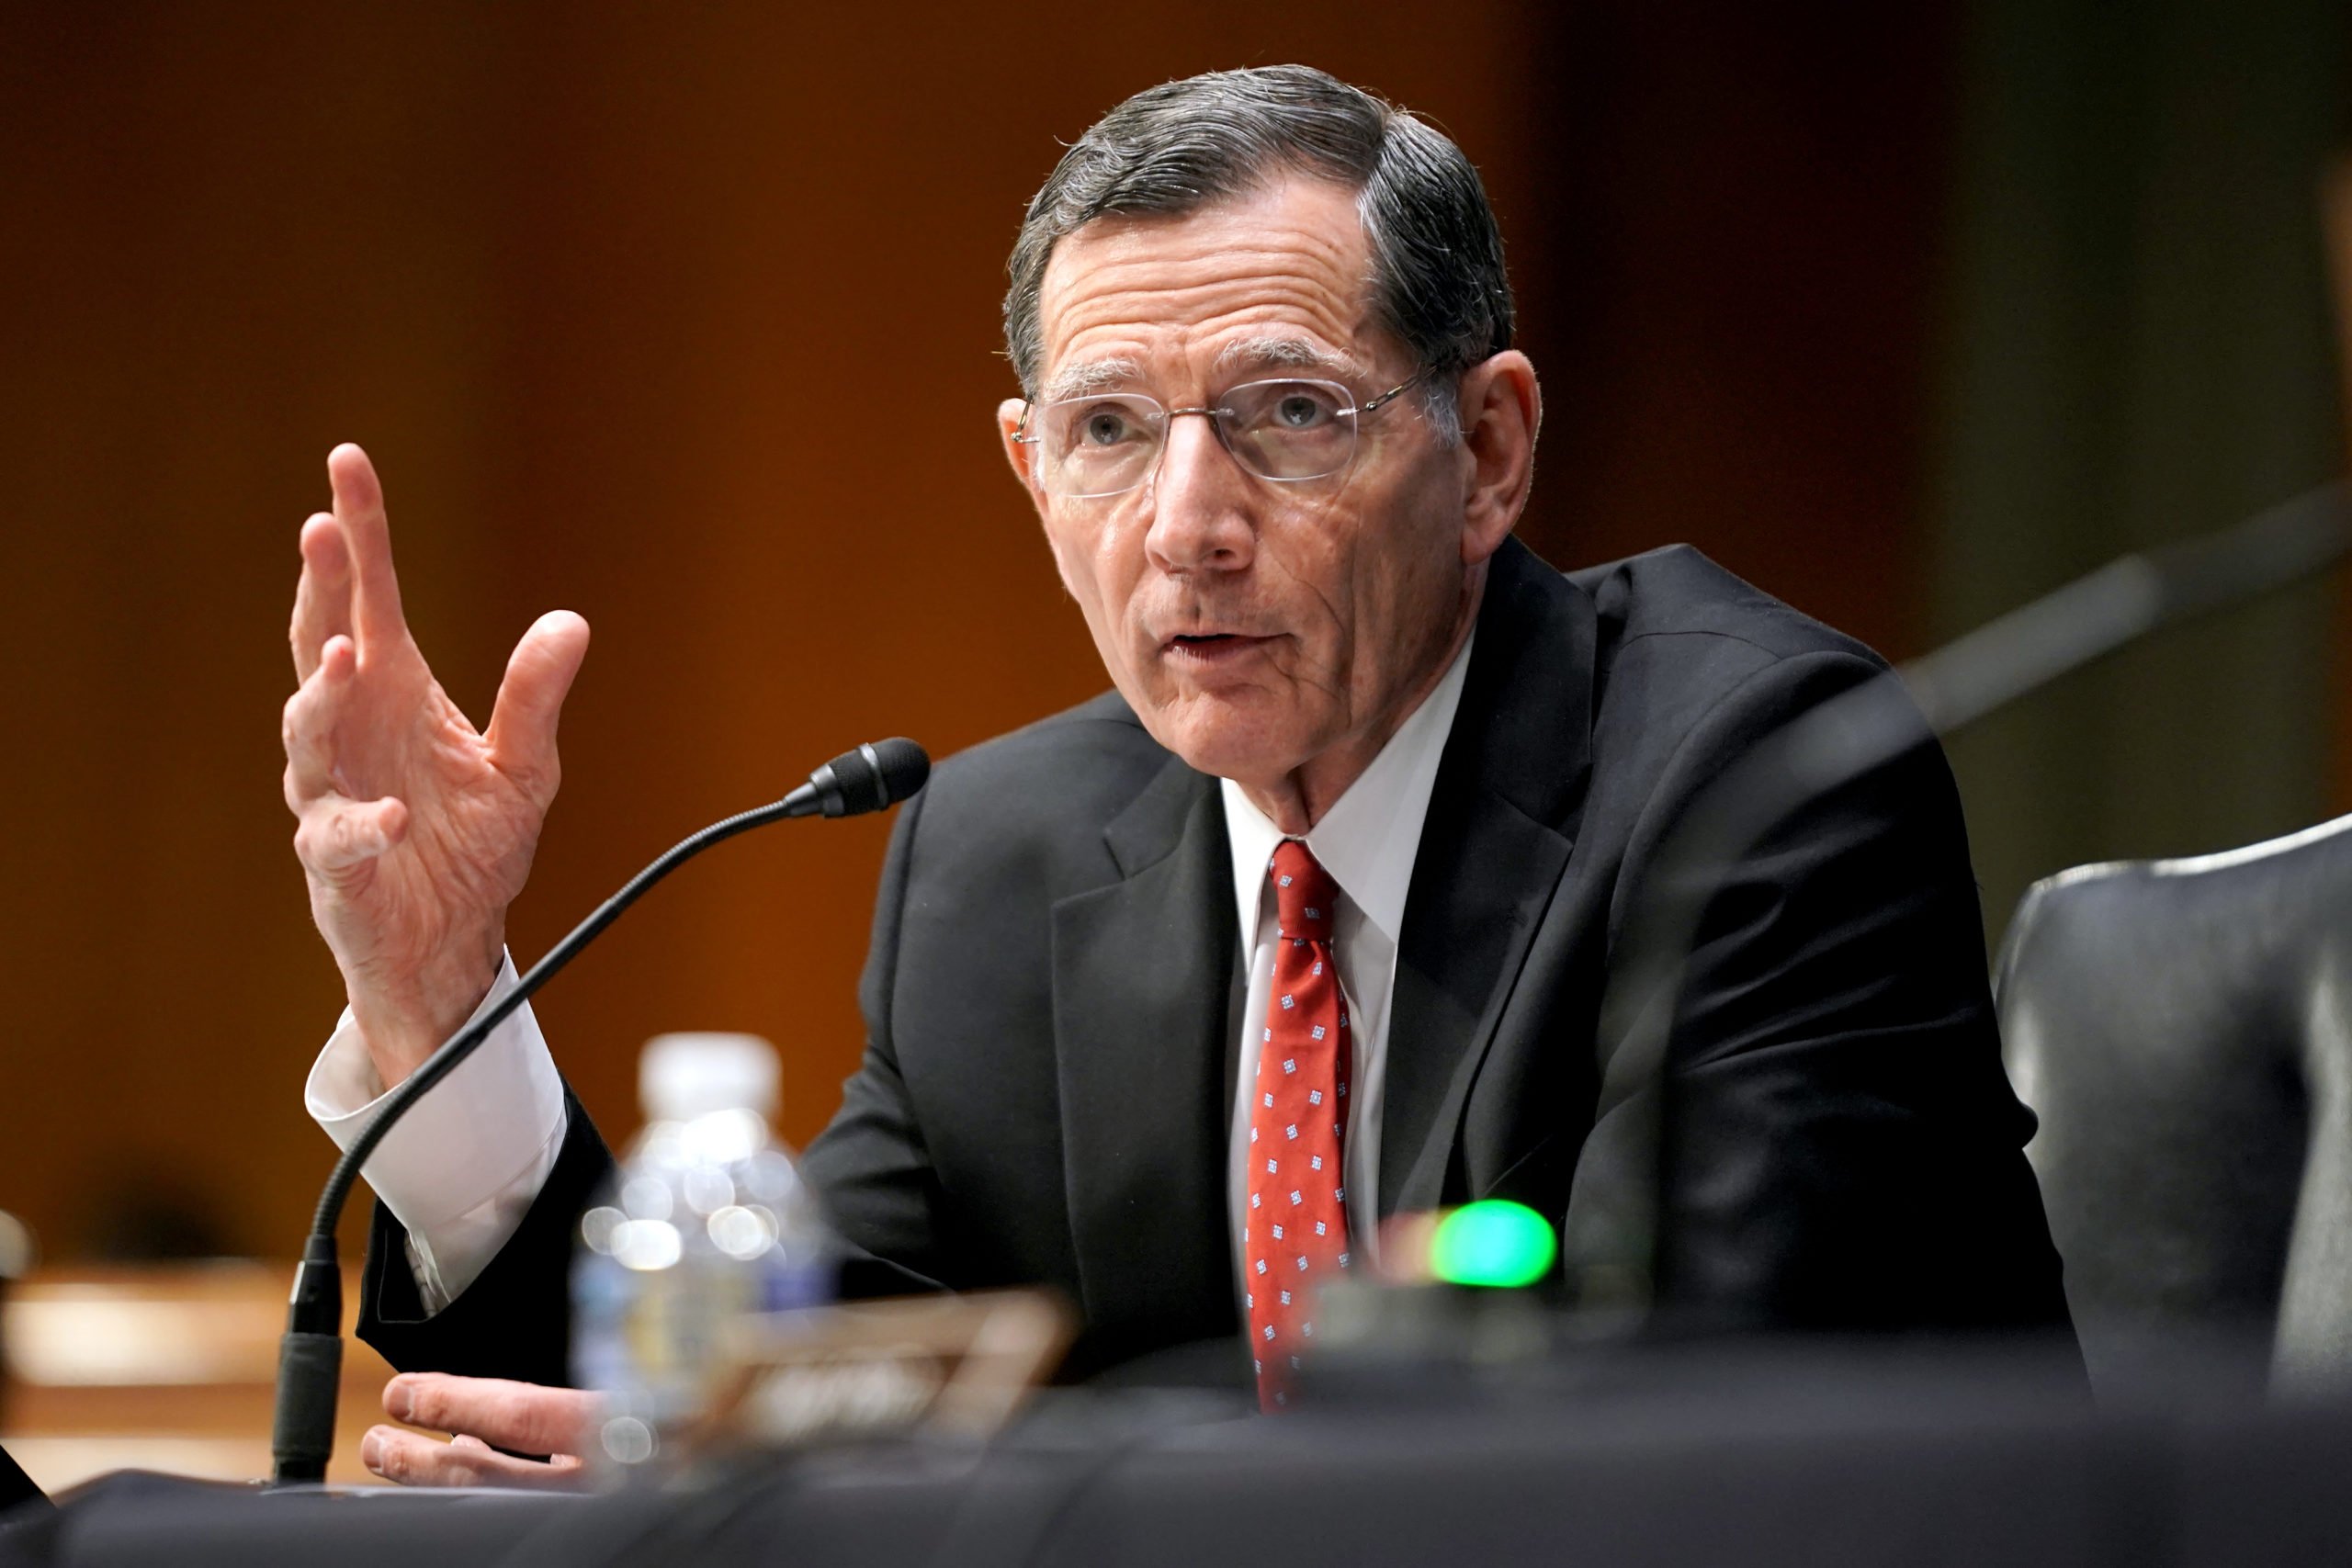 Sen. John Barrasso speaks during a confirmation hearing on March 23. (Greg Nash/Pool/Getty Images)